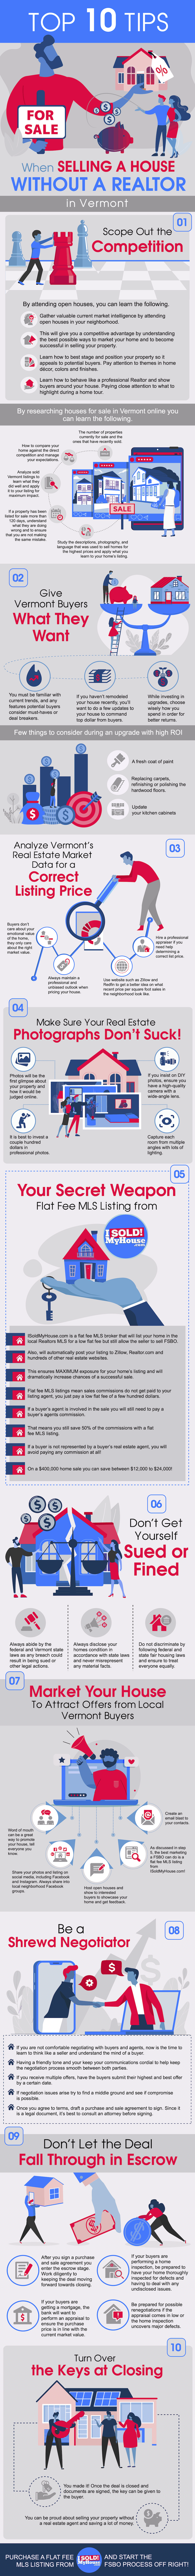 infographic of the 10 steps to sell a house in vermont without an agent